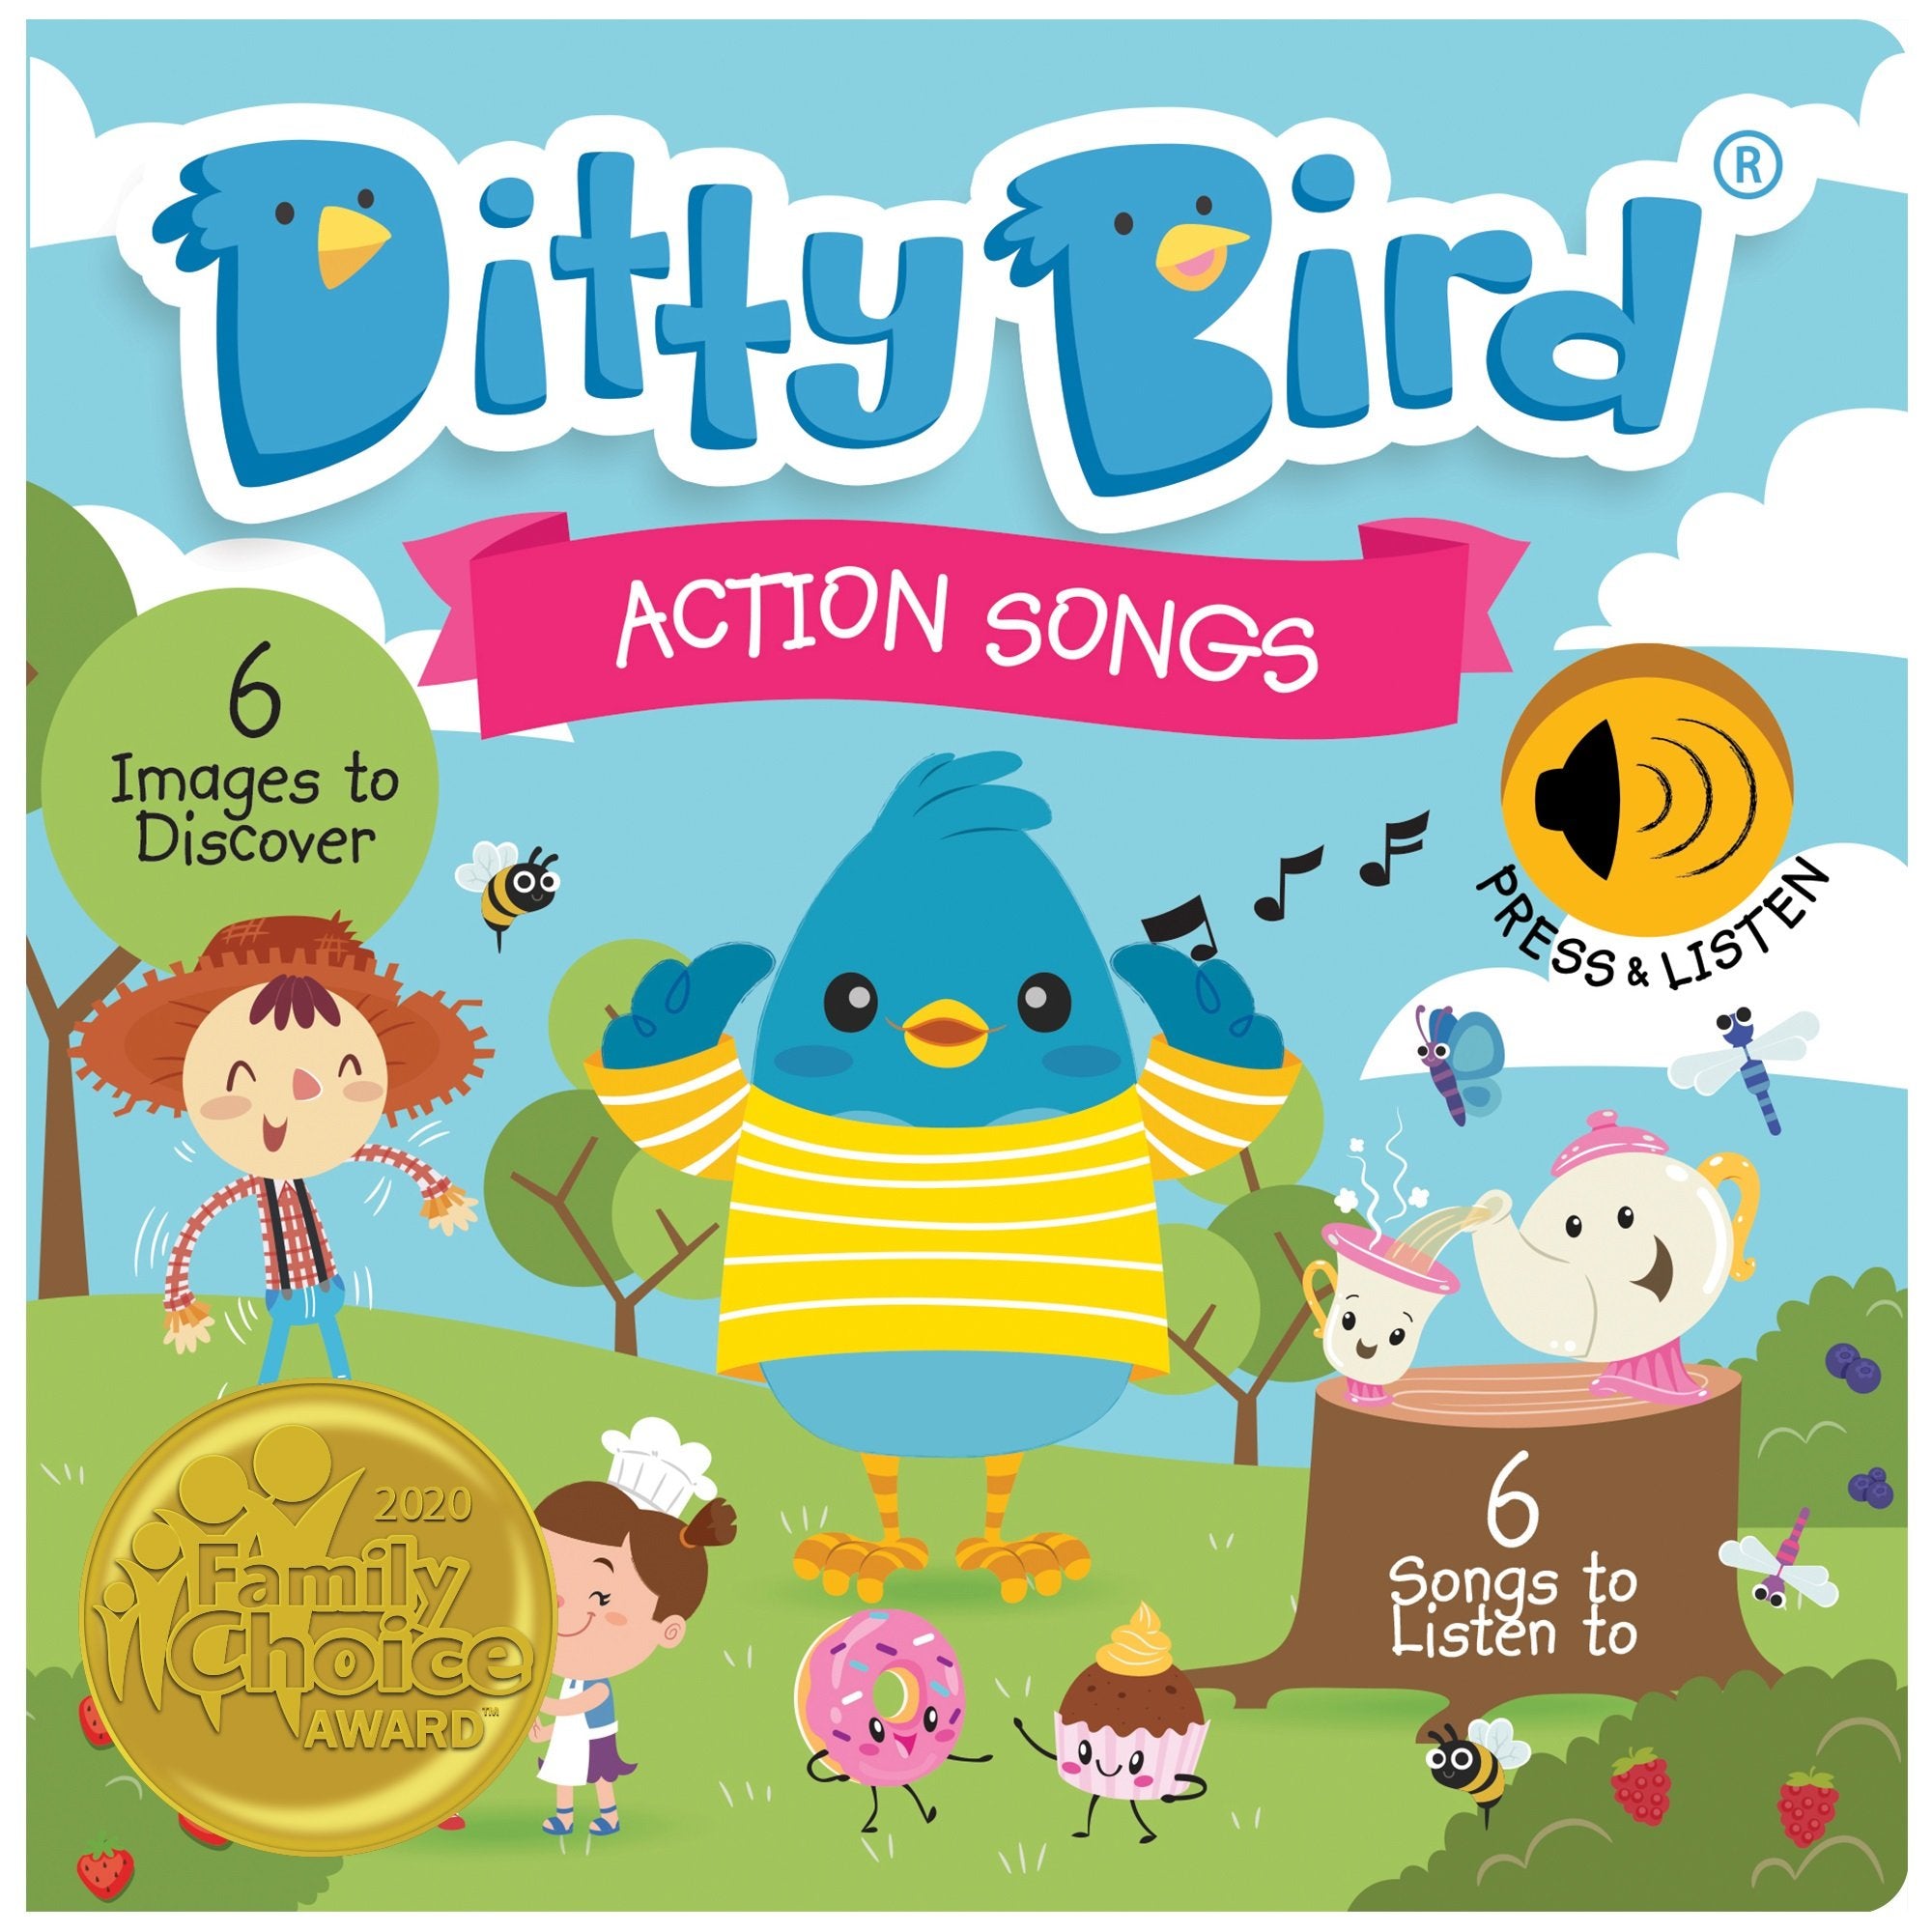 Action Songs by Ditty Bird